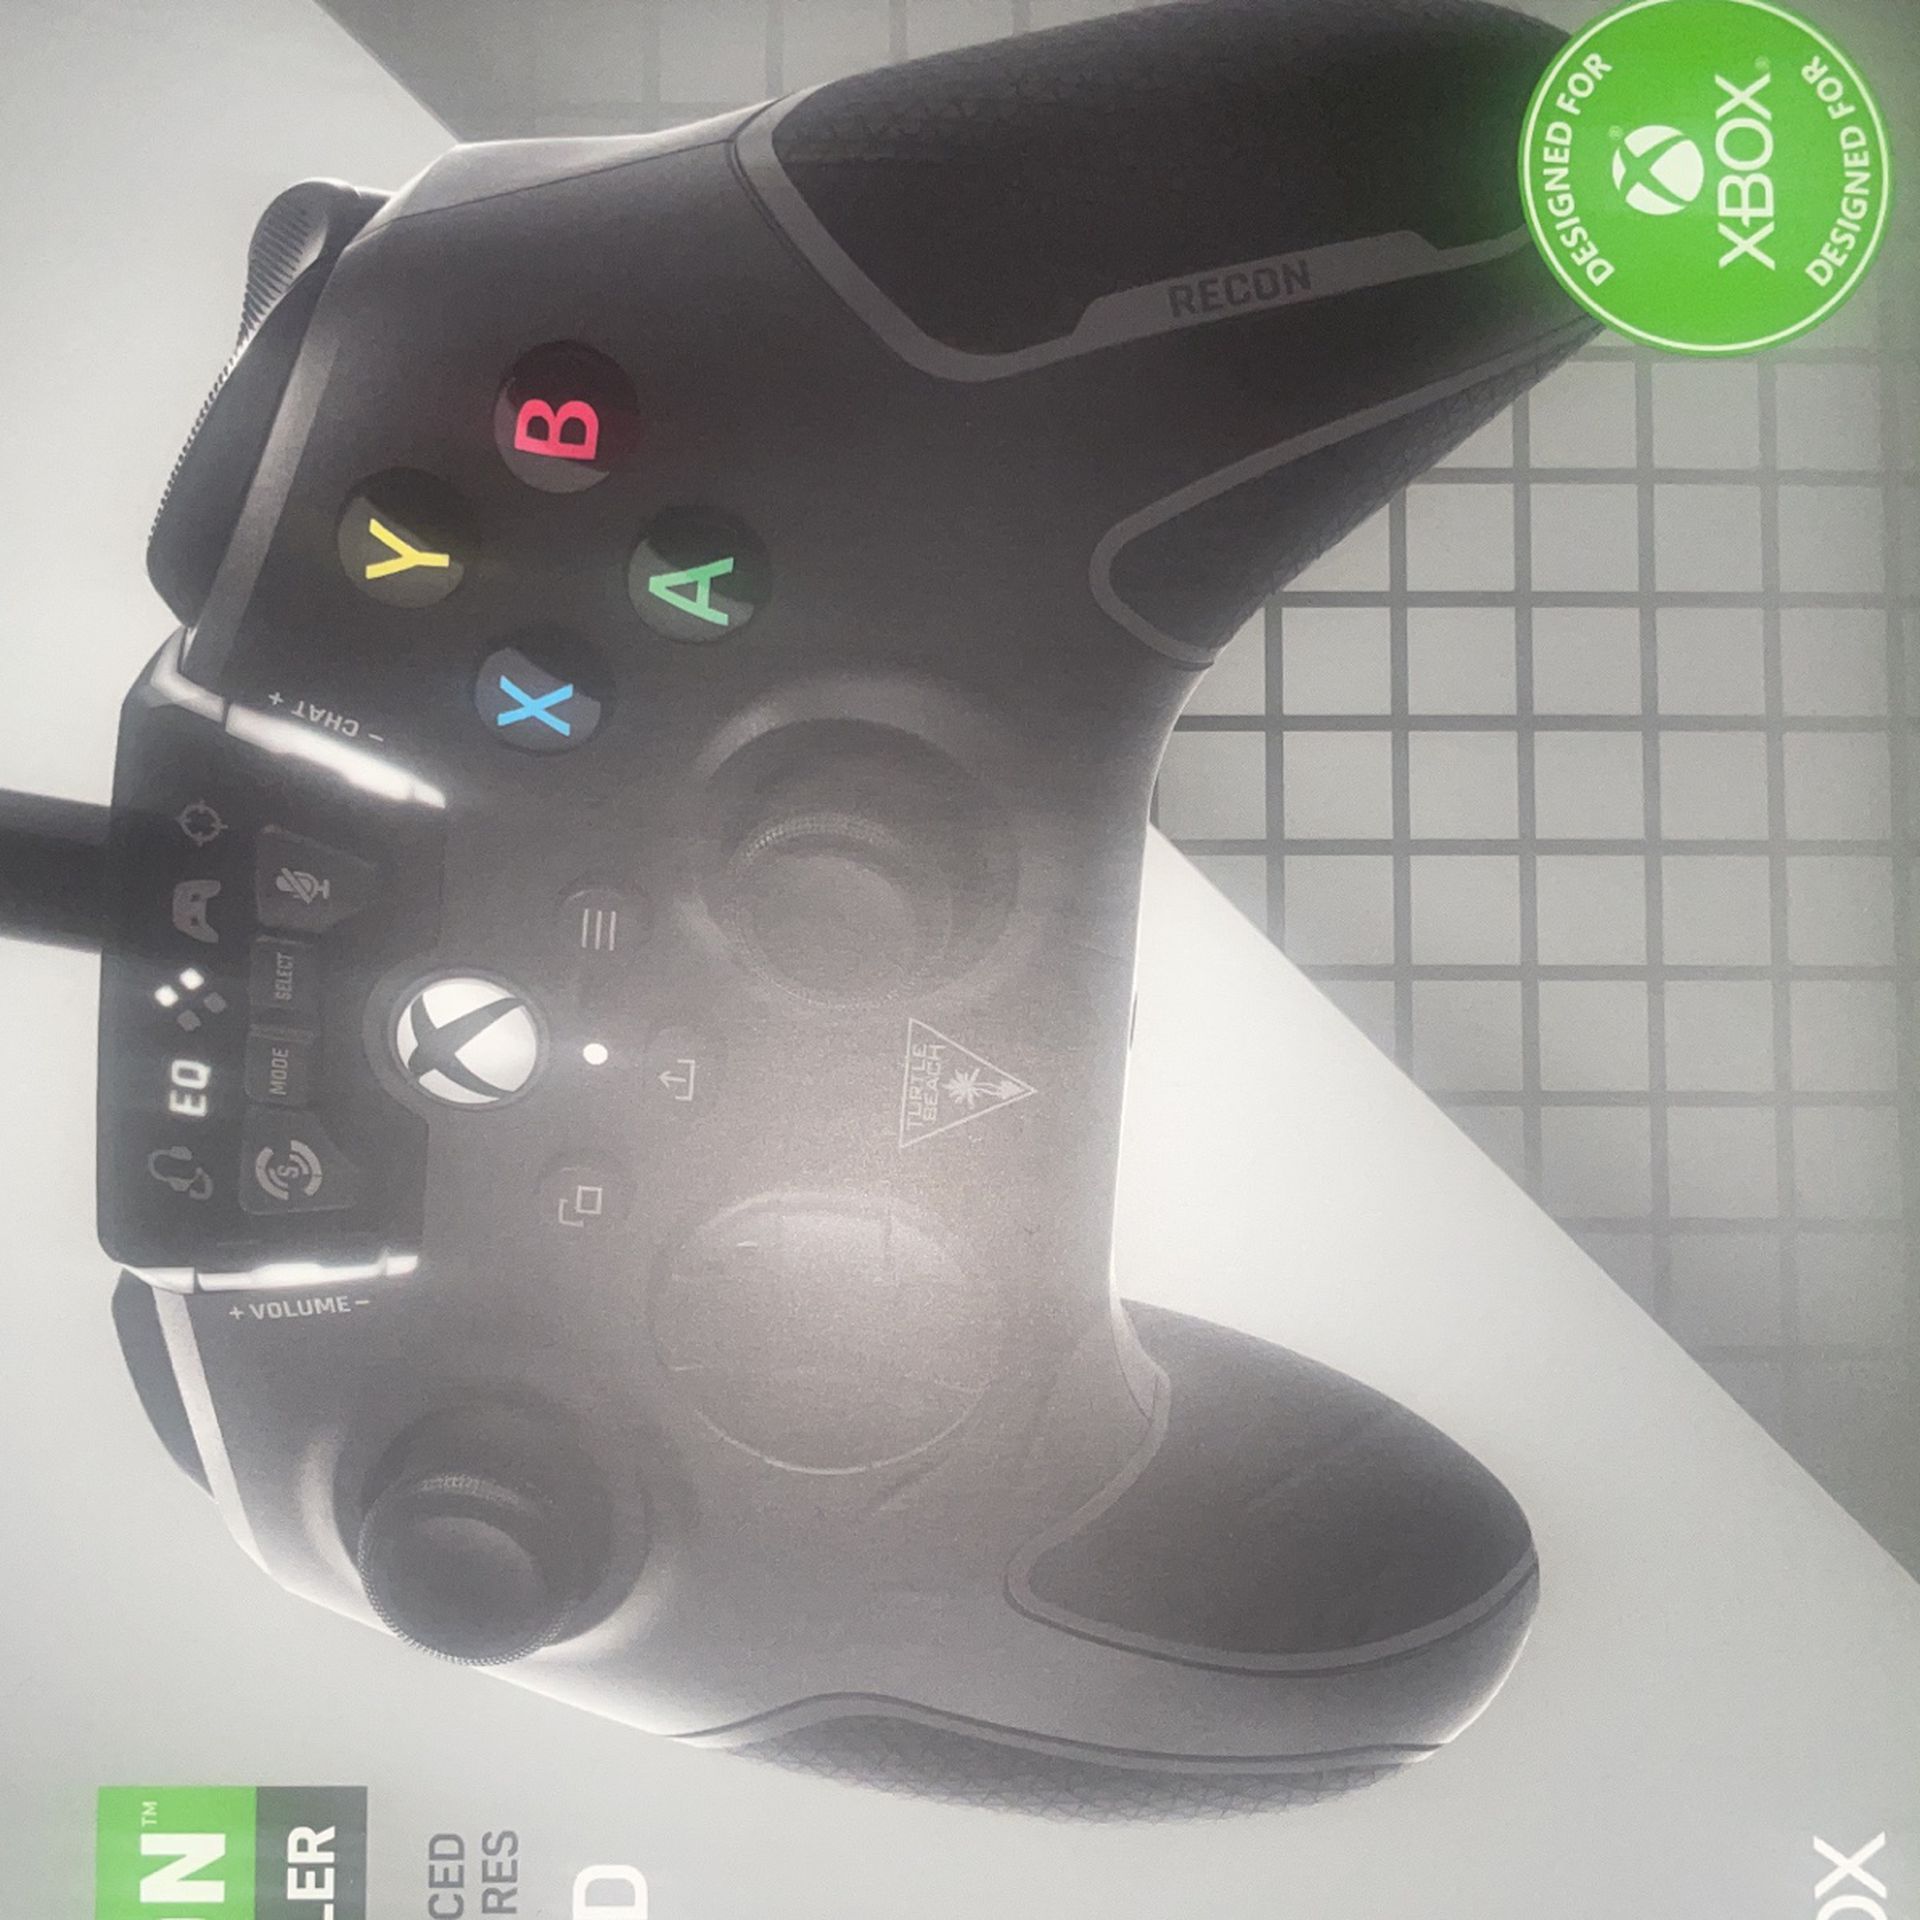 RECON CONTROLLERS BOTH FOR - XBOX